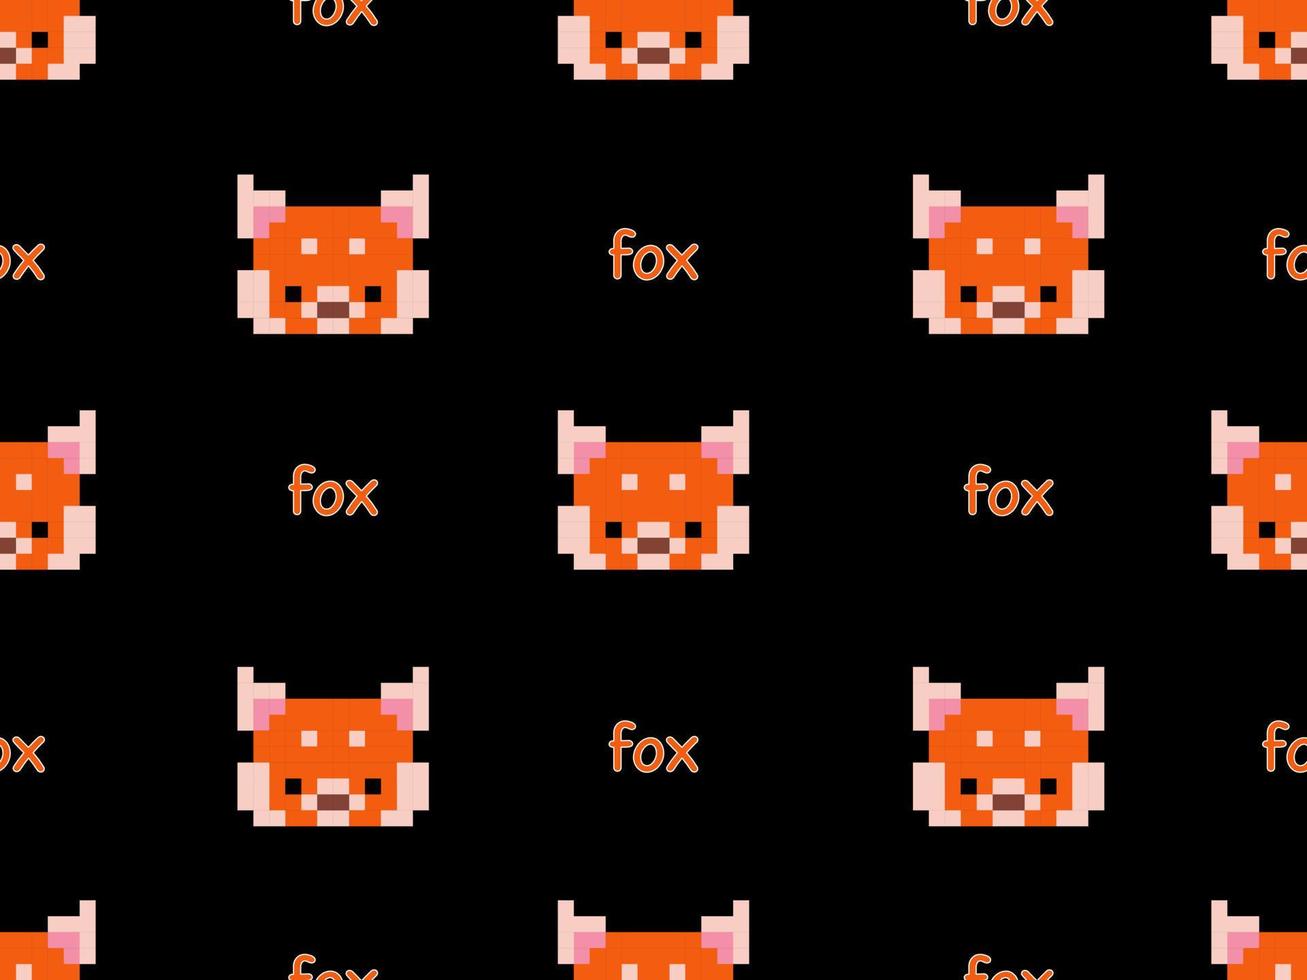 Fox cartoon character seamless pattern on black background.Pixel style vector